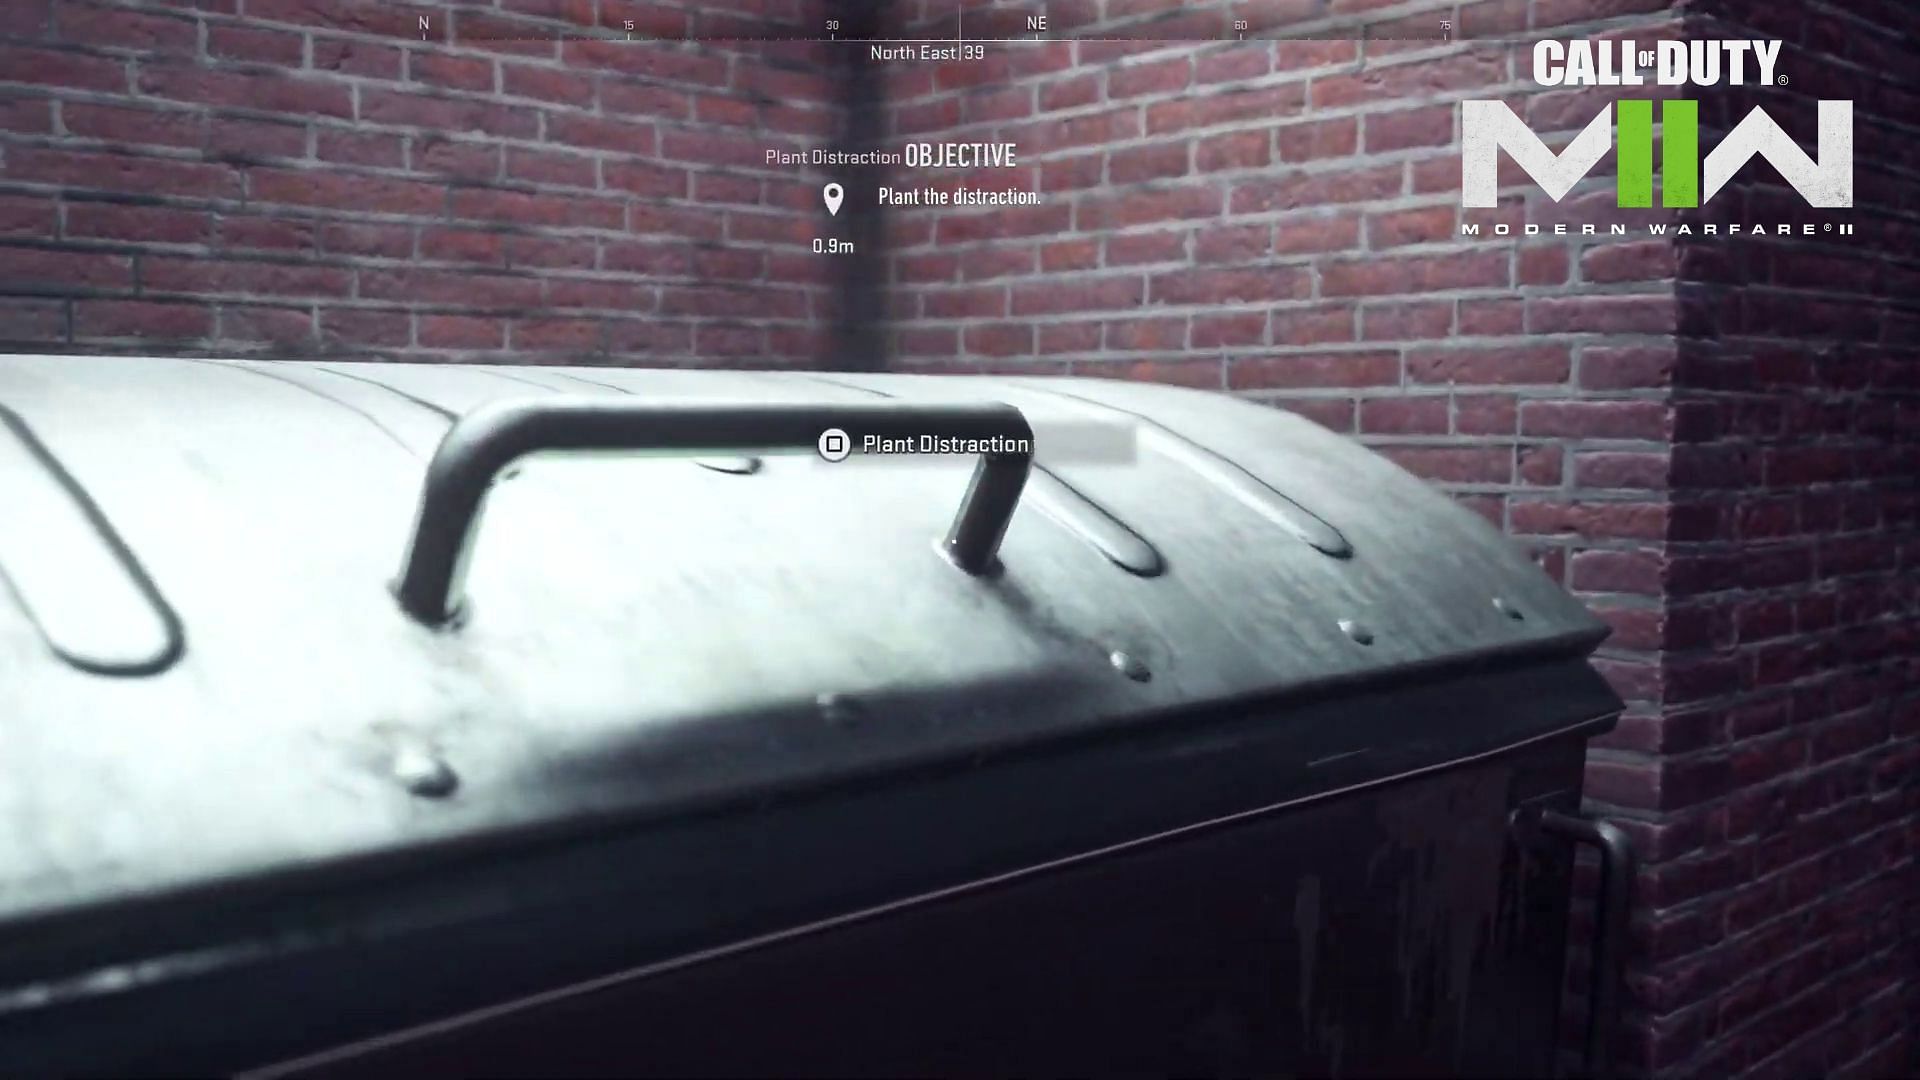 Plant the Decoy on a Dumpster in the Alley (image via Activision)